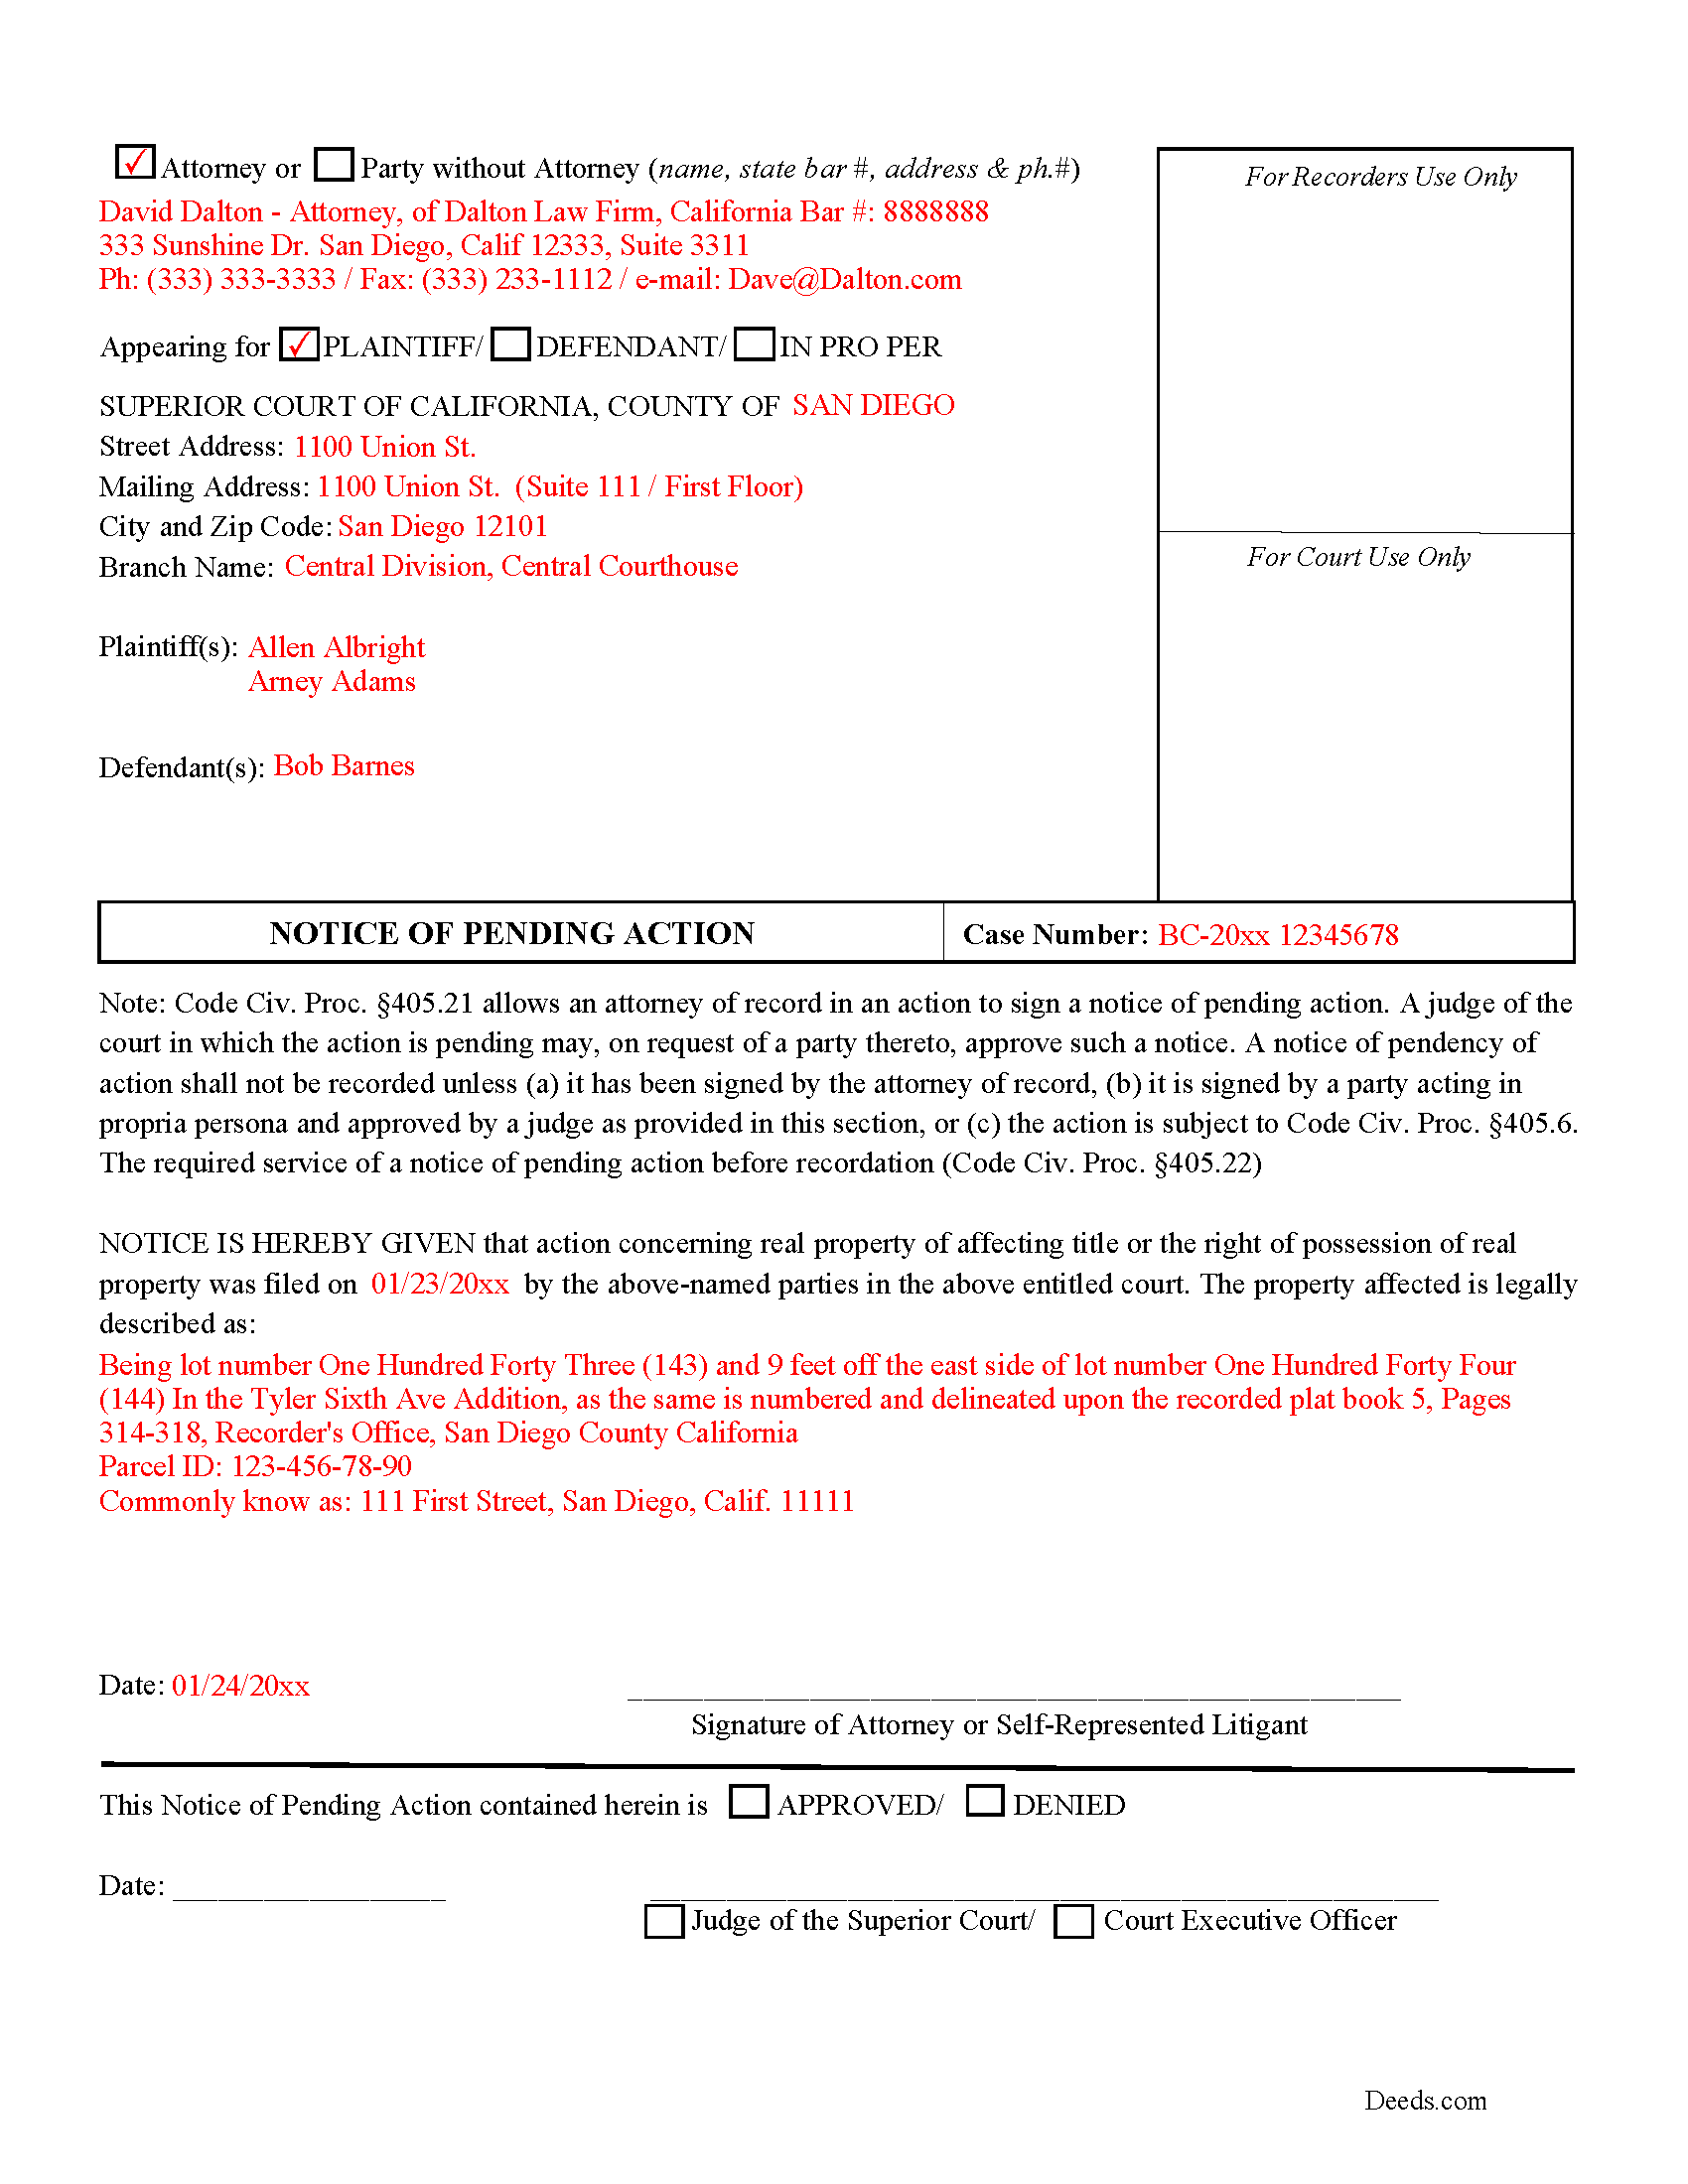 Completed Example of the Notice of Pending Action Document